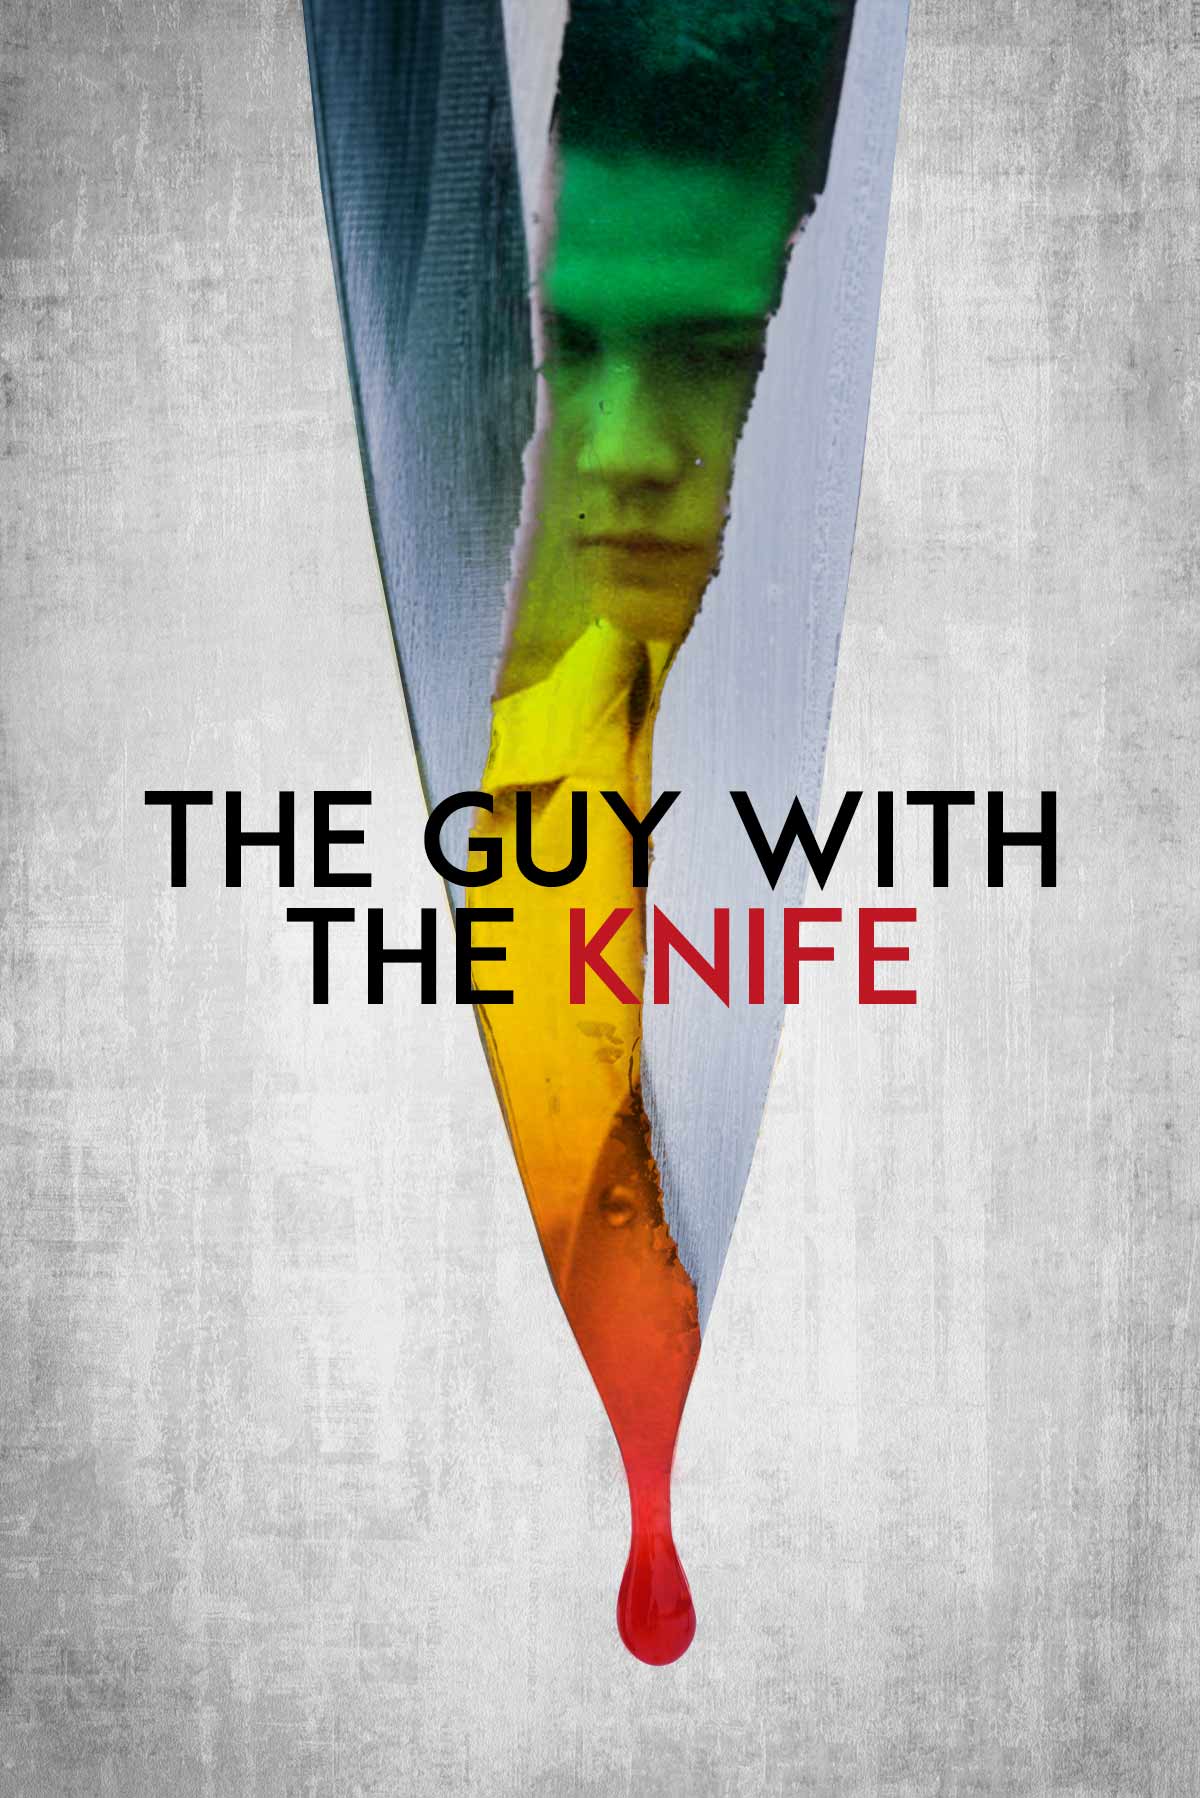 The Guy With the Knife